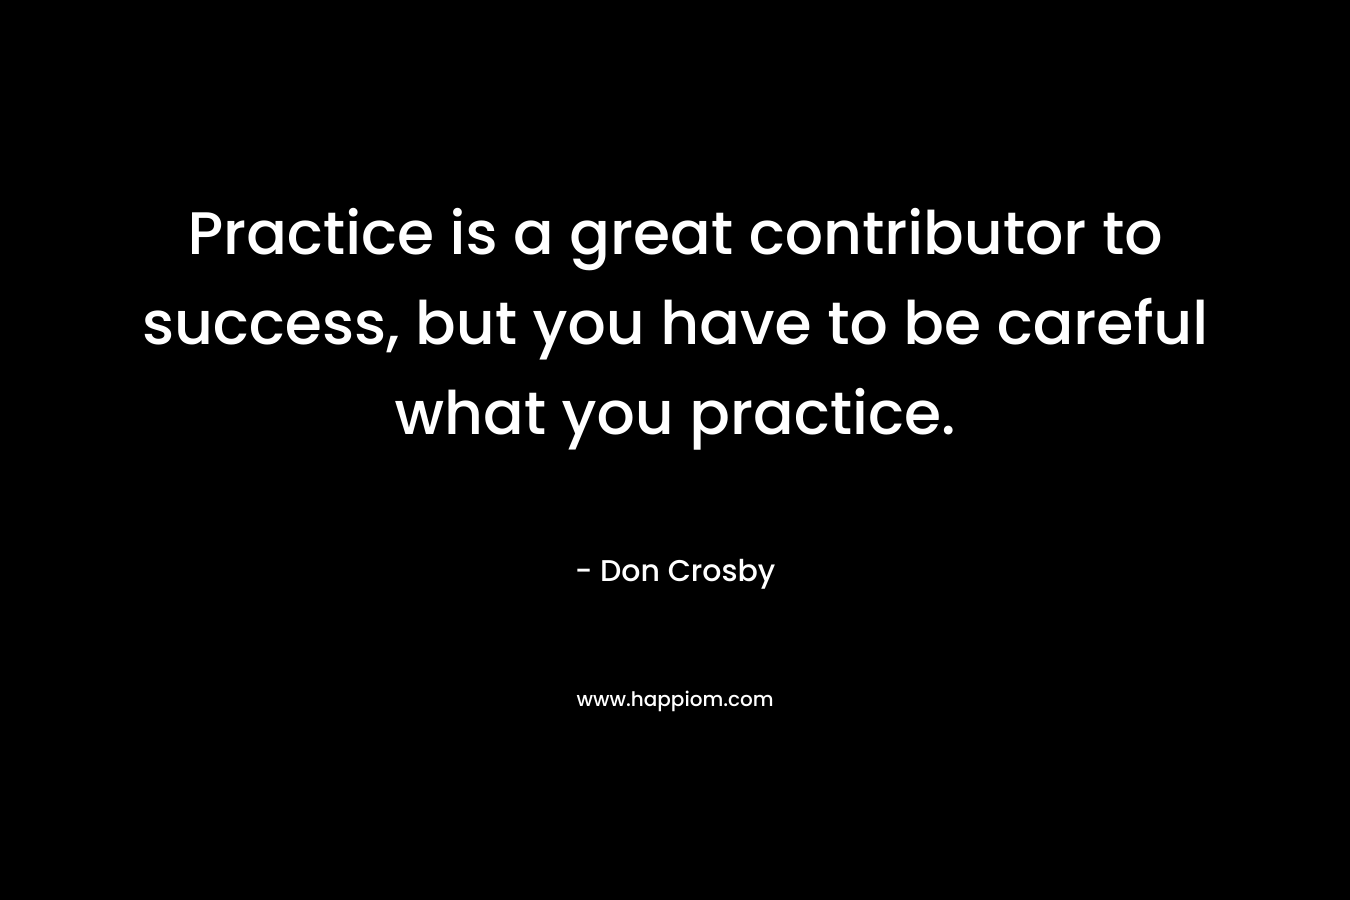 Practice is a great contributor to success, but you have to be careful what you practice.